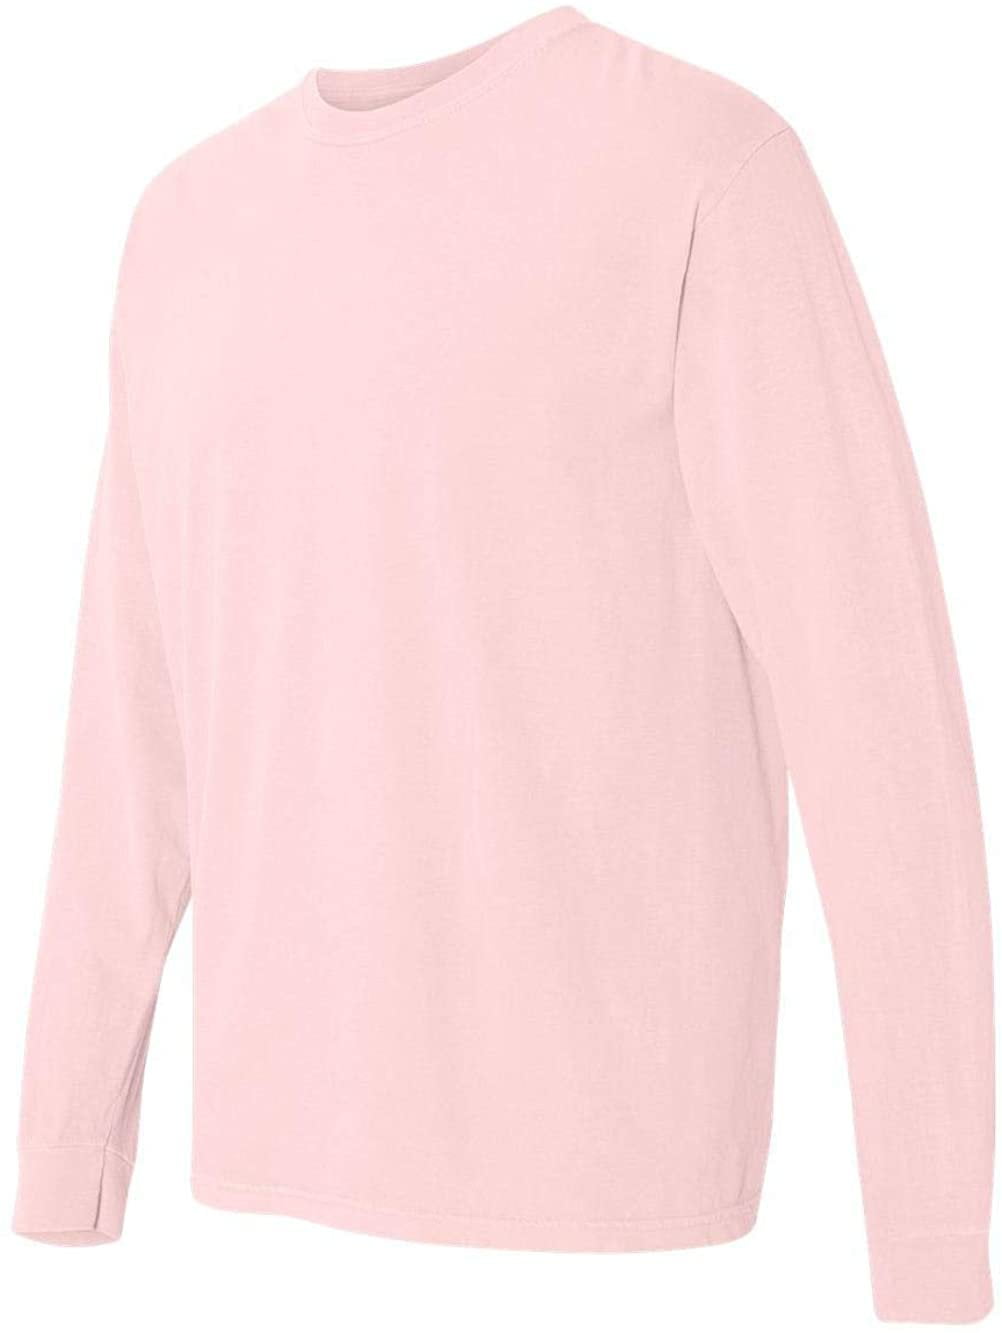 Style 6014 Comfort Colors Adult Long Sleeve Tee